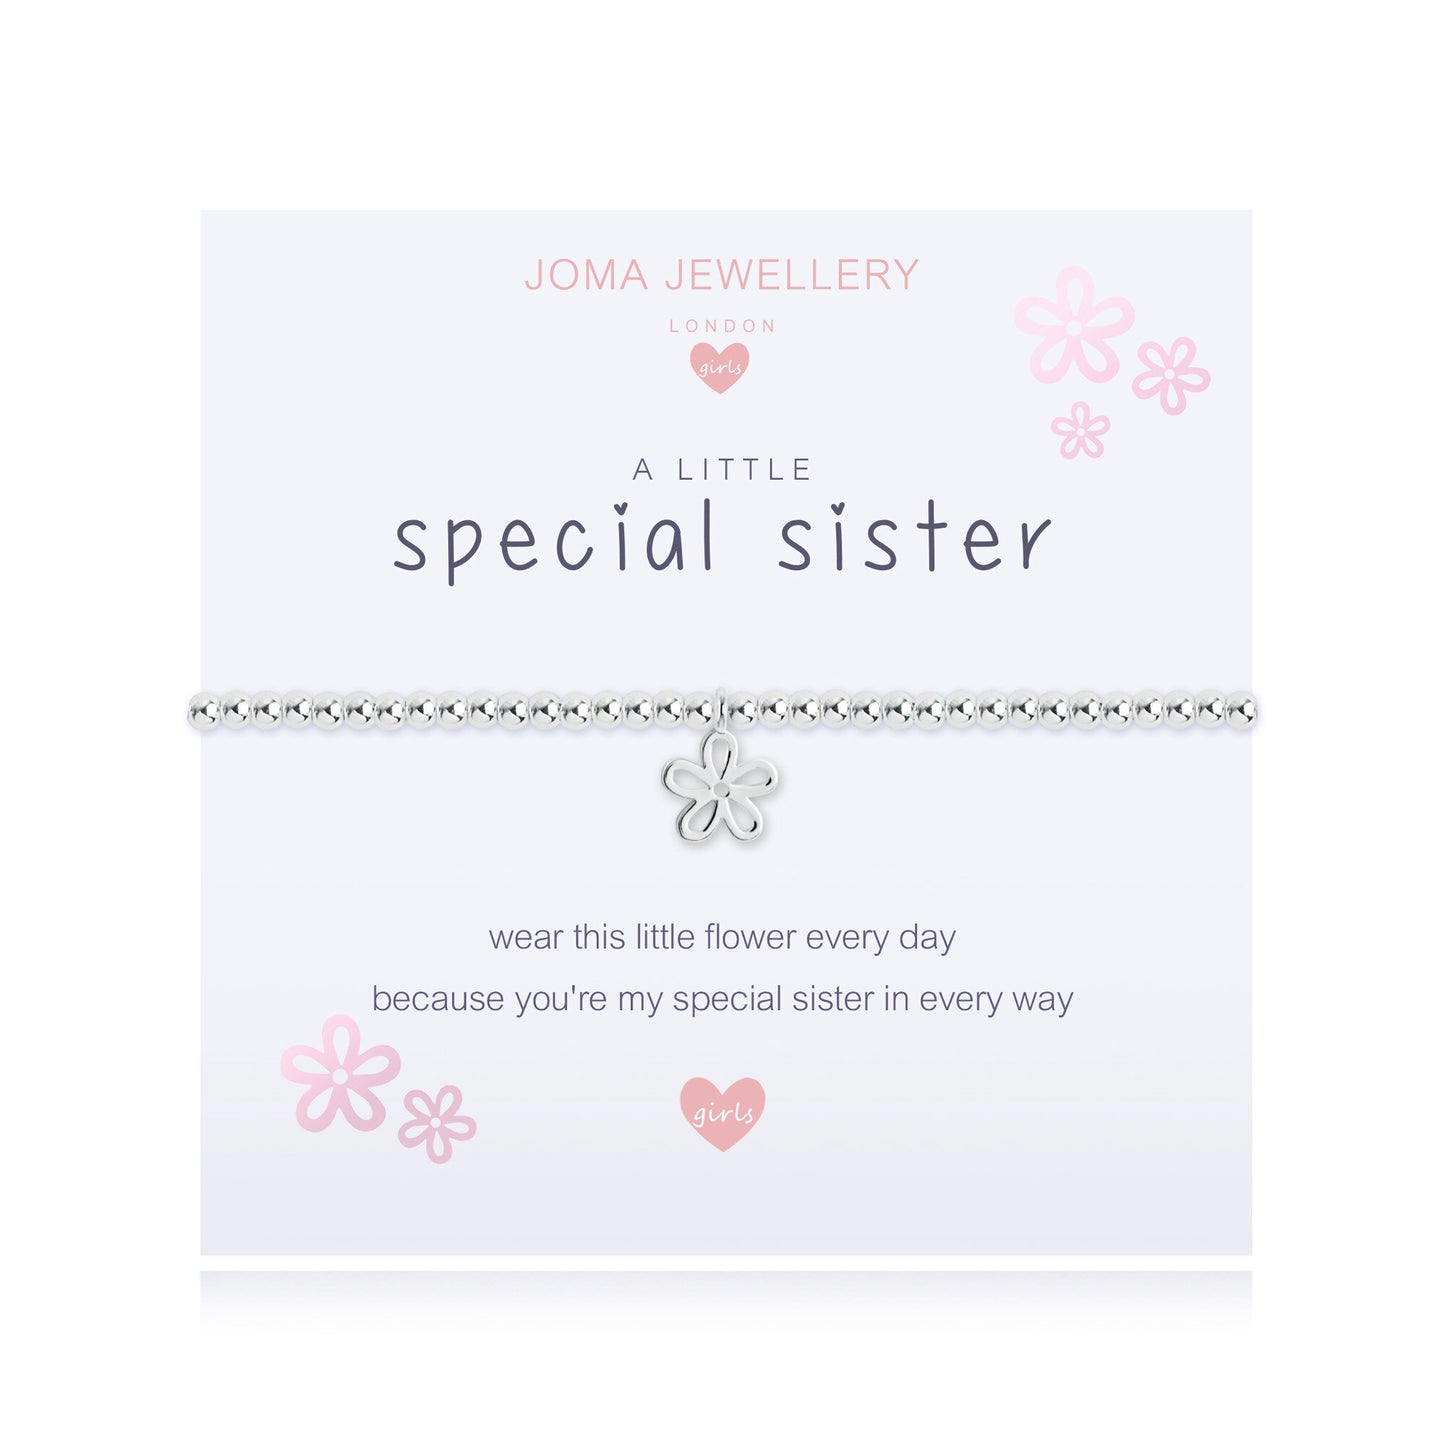 'A Little' Special Sister Children's Bracelet Silver-Plated